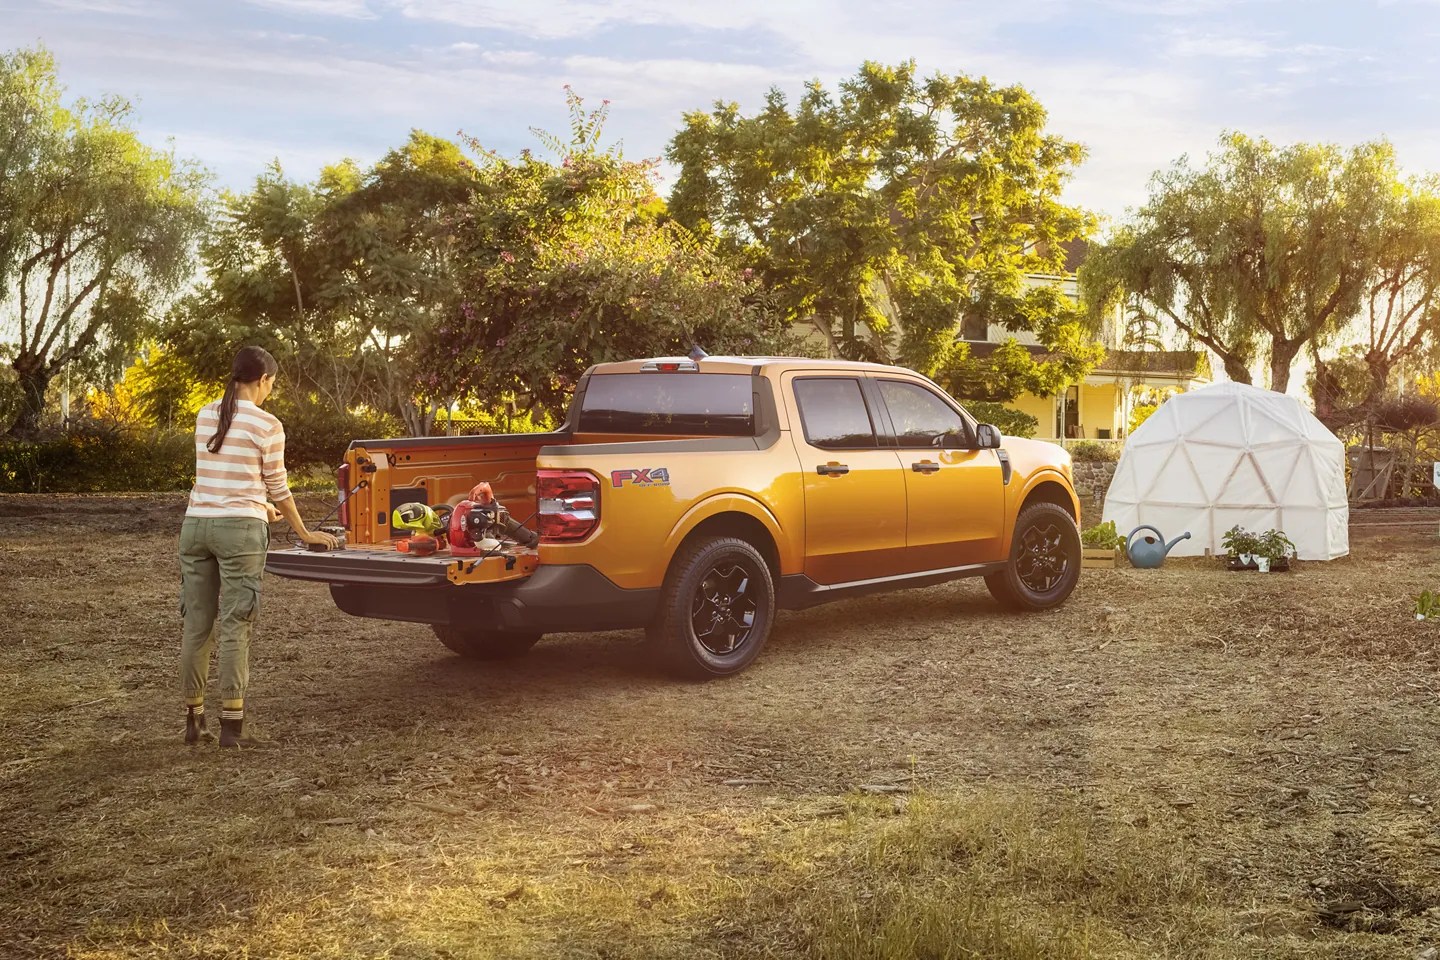 The 2022 Ford Maverick with the FX4 Off-Road Package of off-road capability.